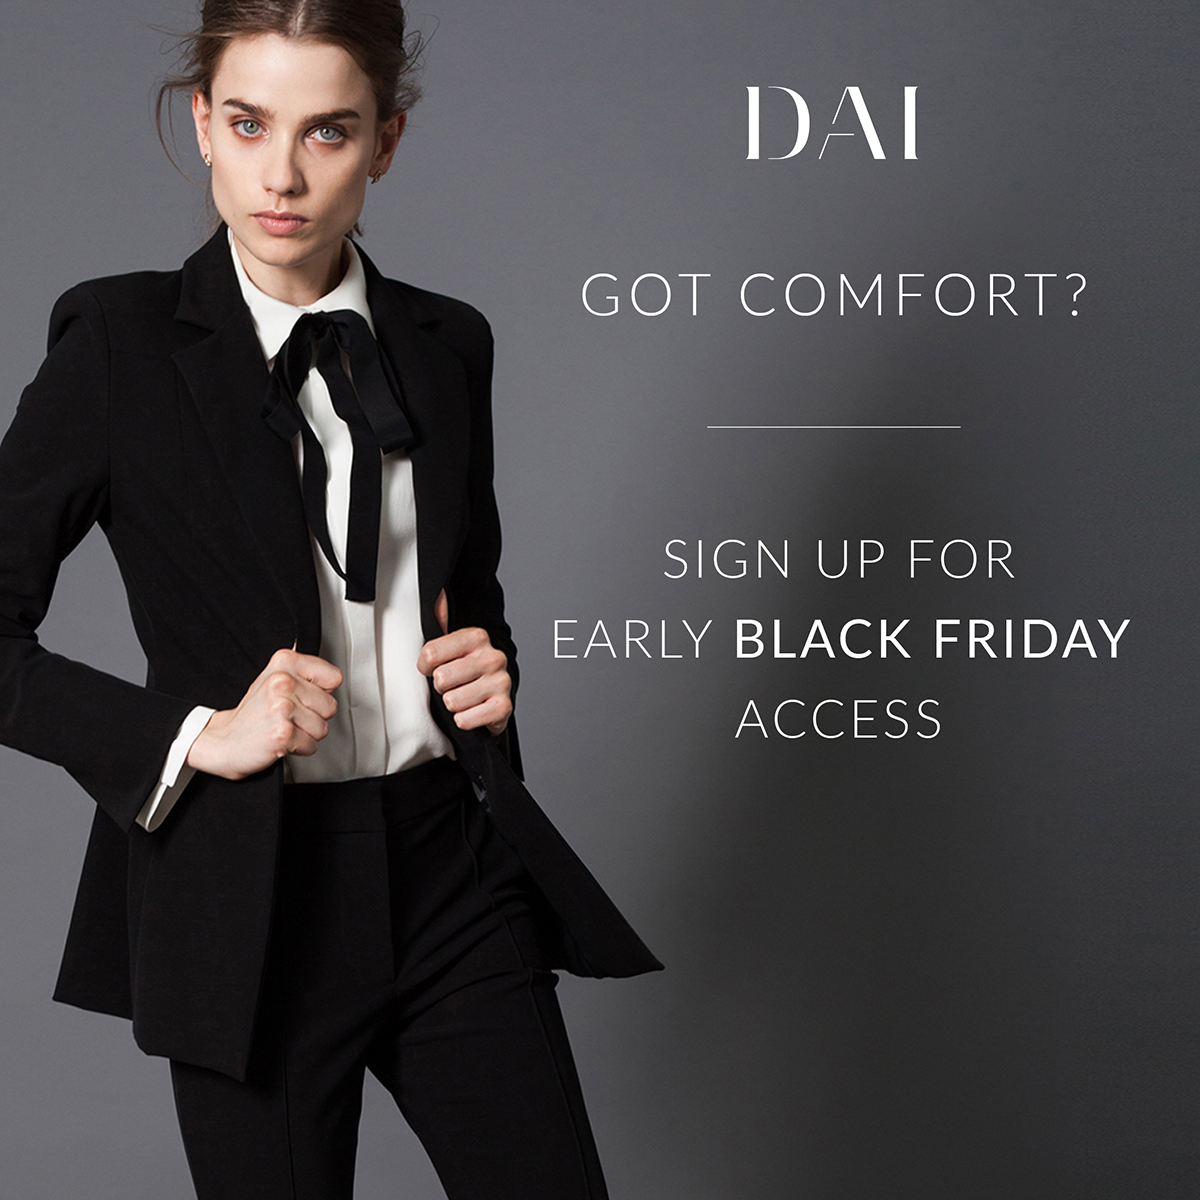 Sign up for exclusive early access to Black Friday